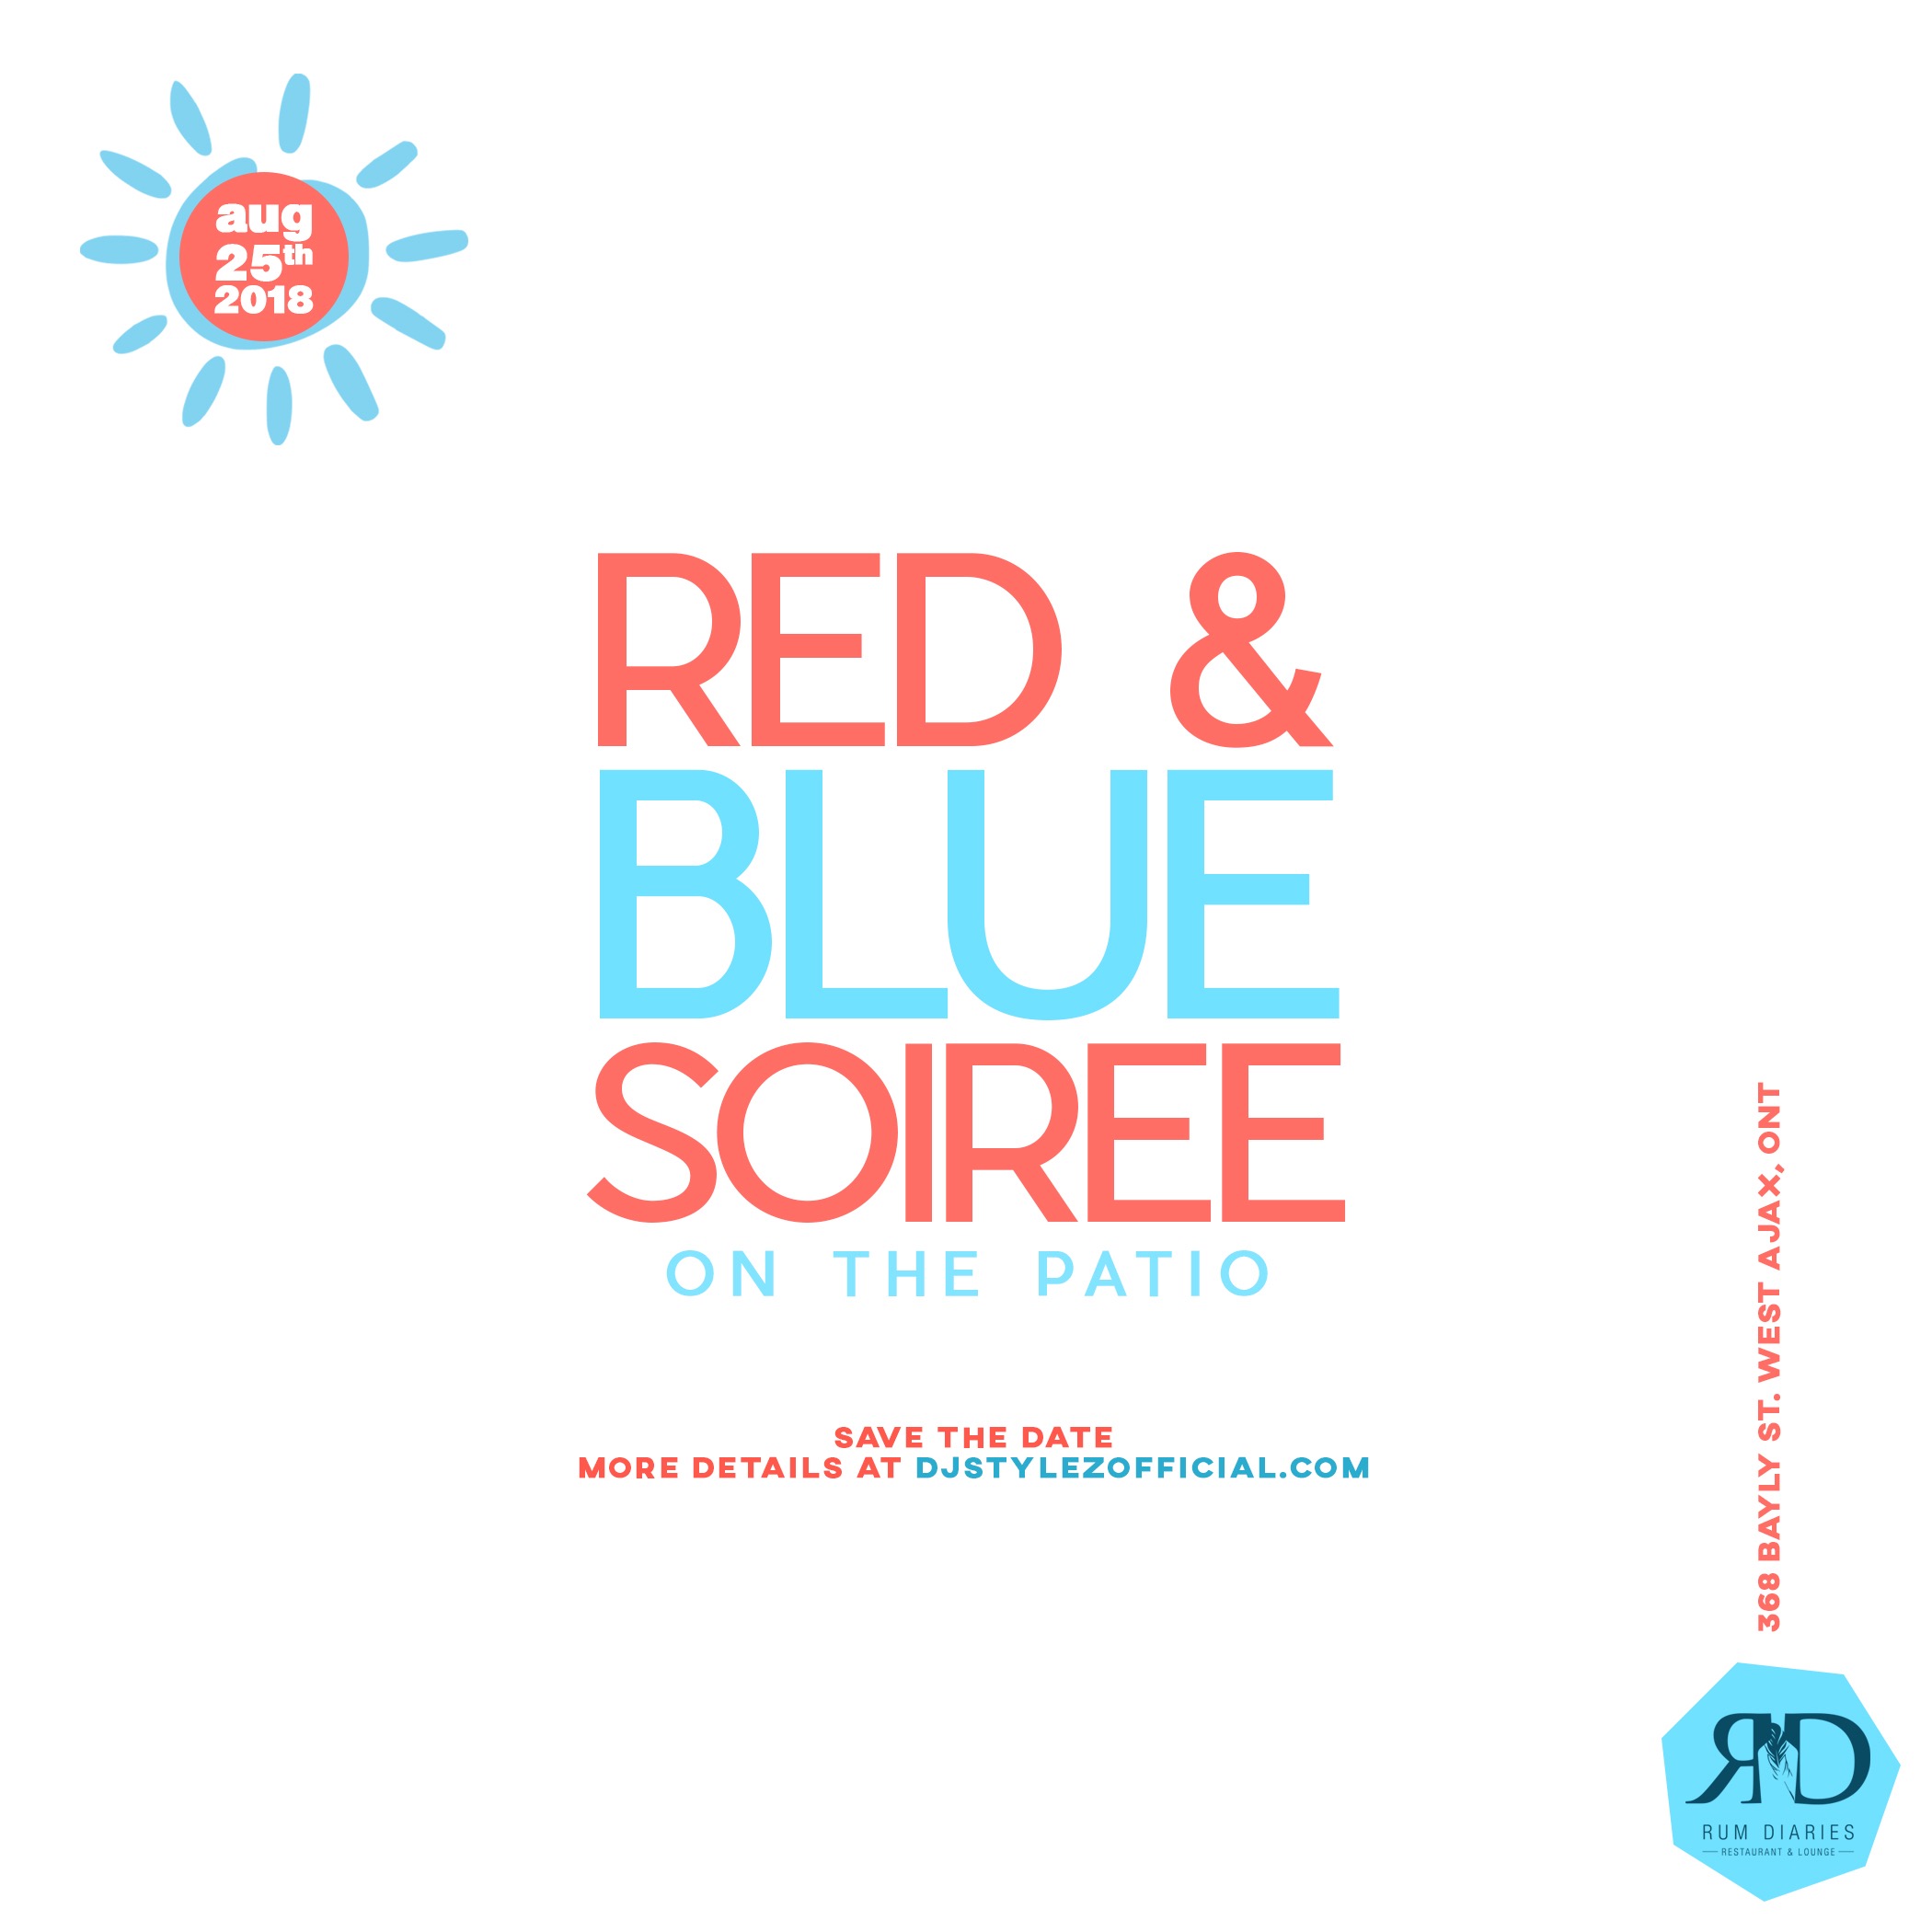 RED AND BLUE SOIREE